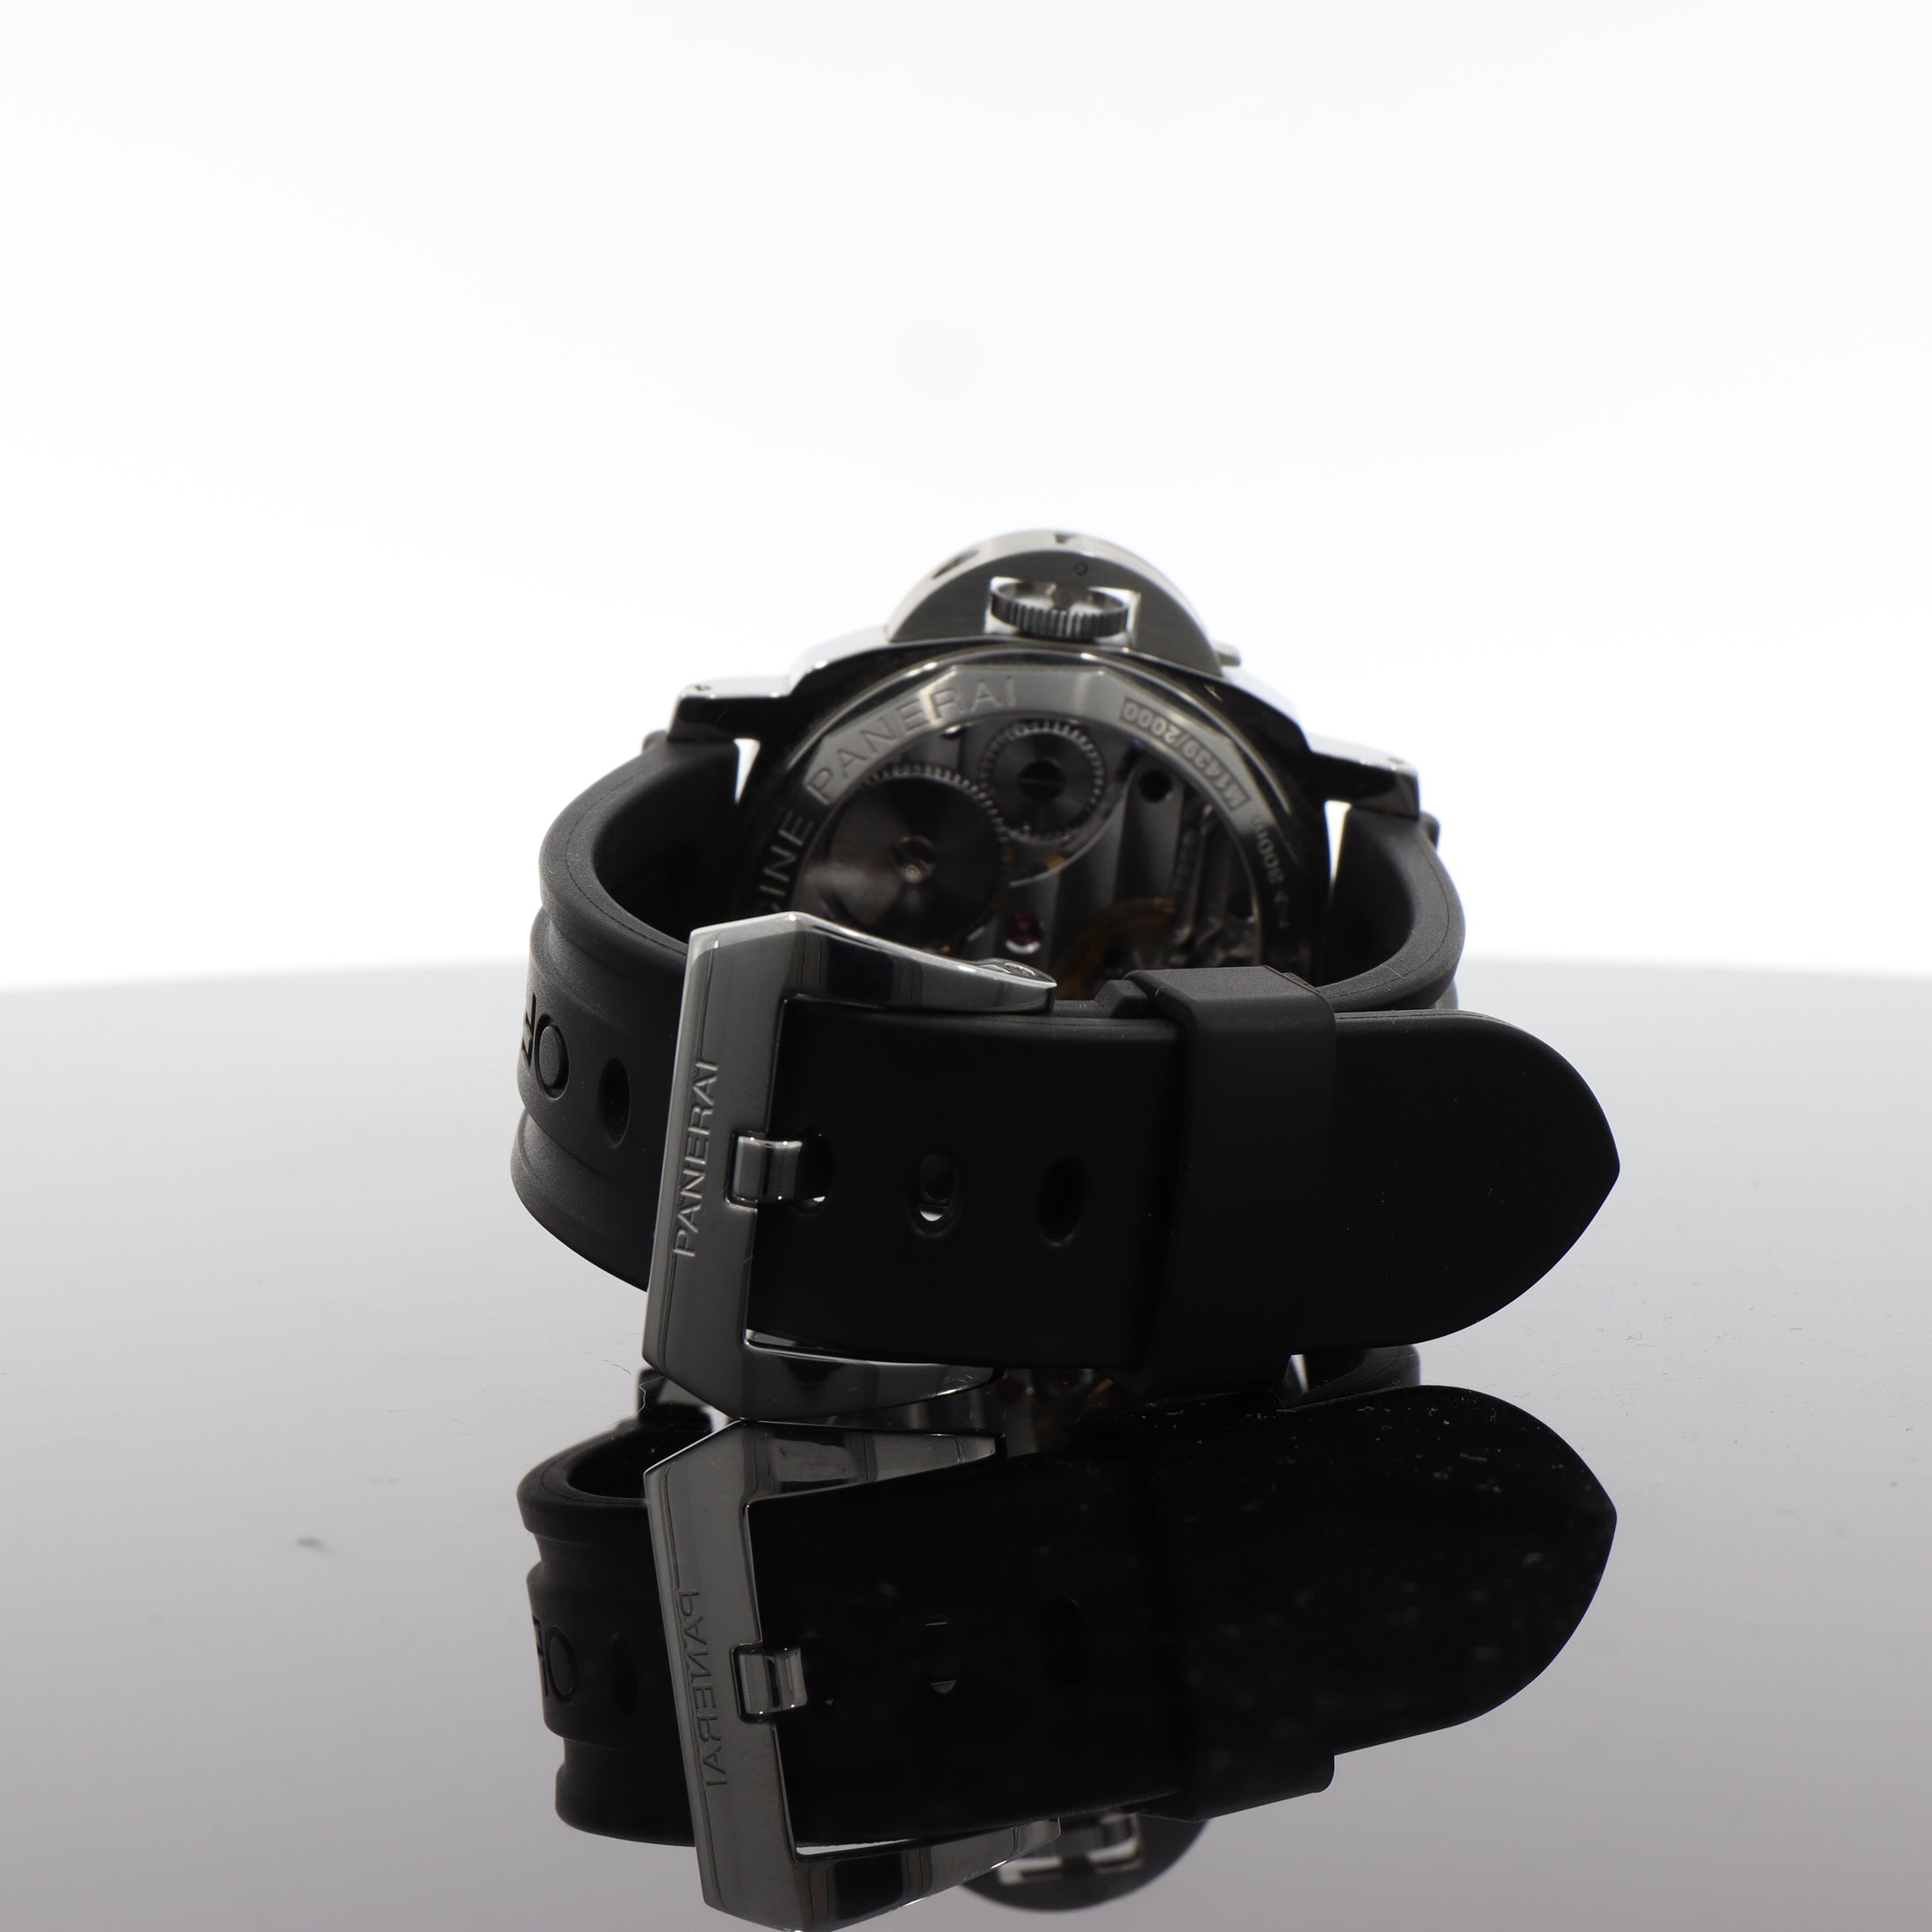 Panerai Luminor Base PAM00112 rubber strap black with service papers